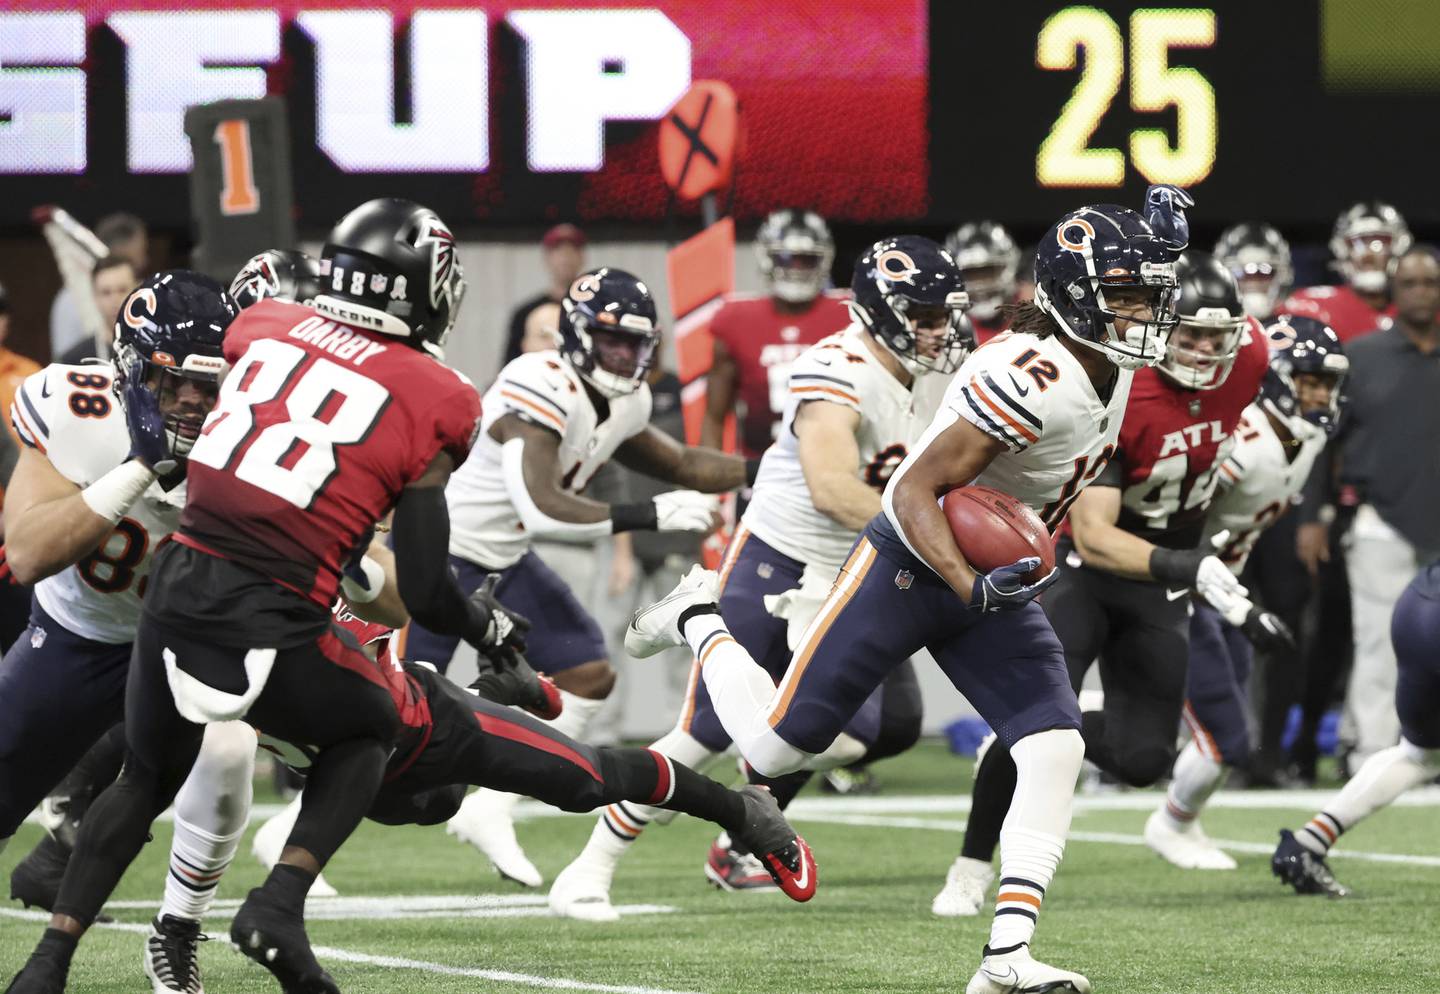 Bears wide receiver Velus Jones Jr. (12) returns a kickoff in the first quarter against the Falcons on Nov. 20, 2022, in Atlanta.